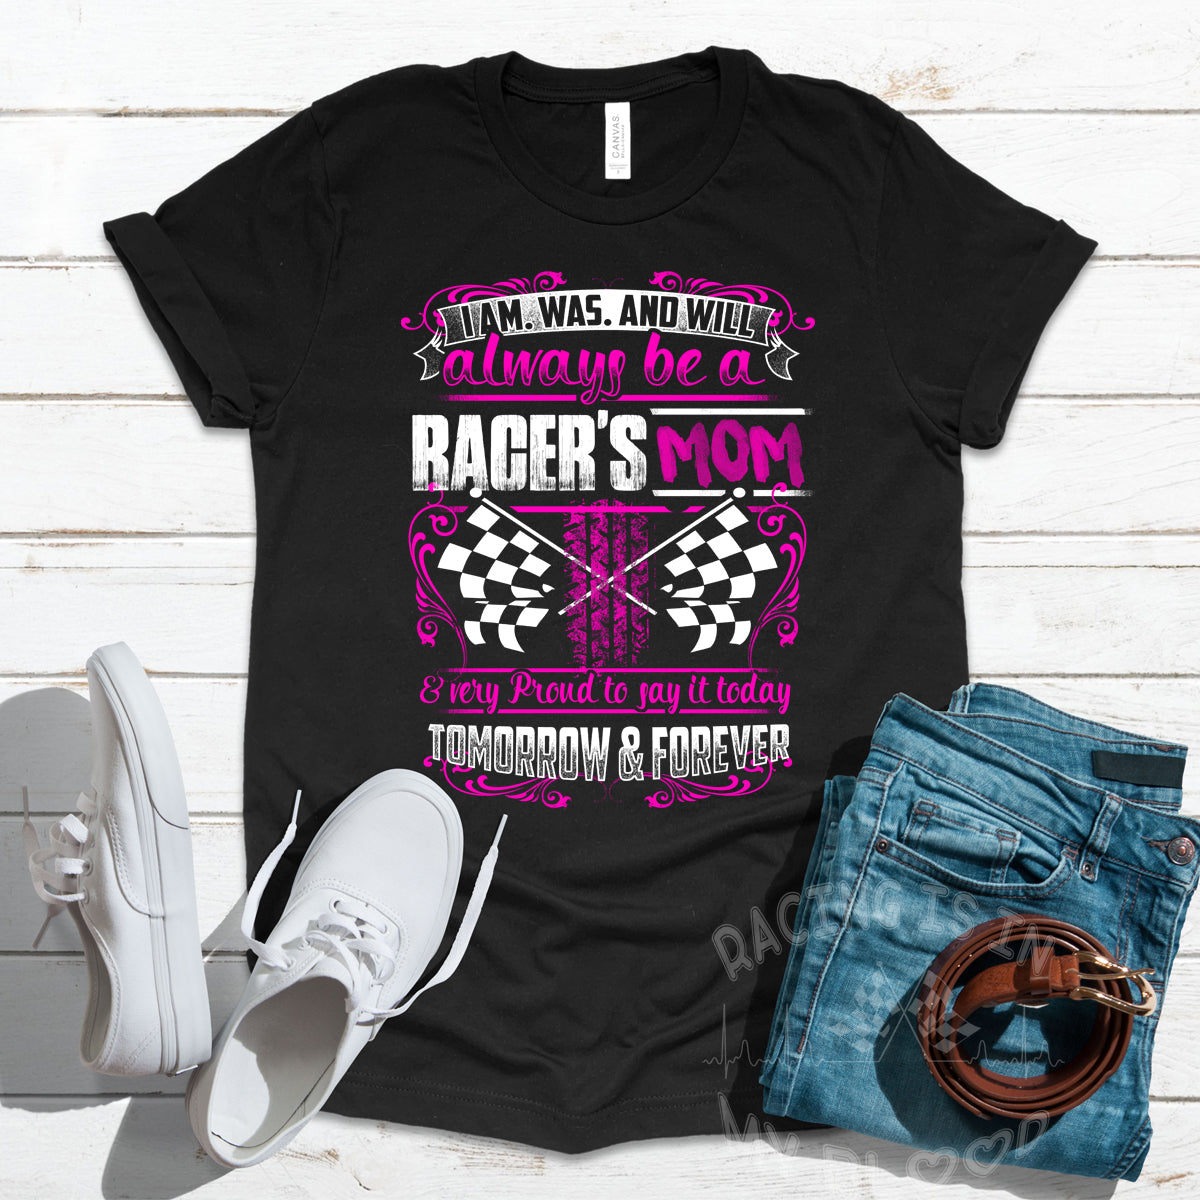 I'm Was And Will Always Be A Racer's Mom T-Shirts!